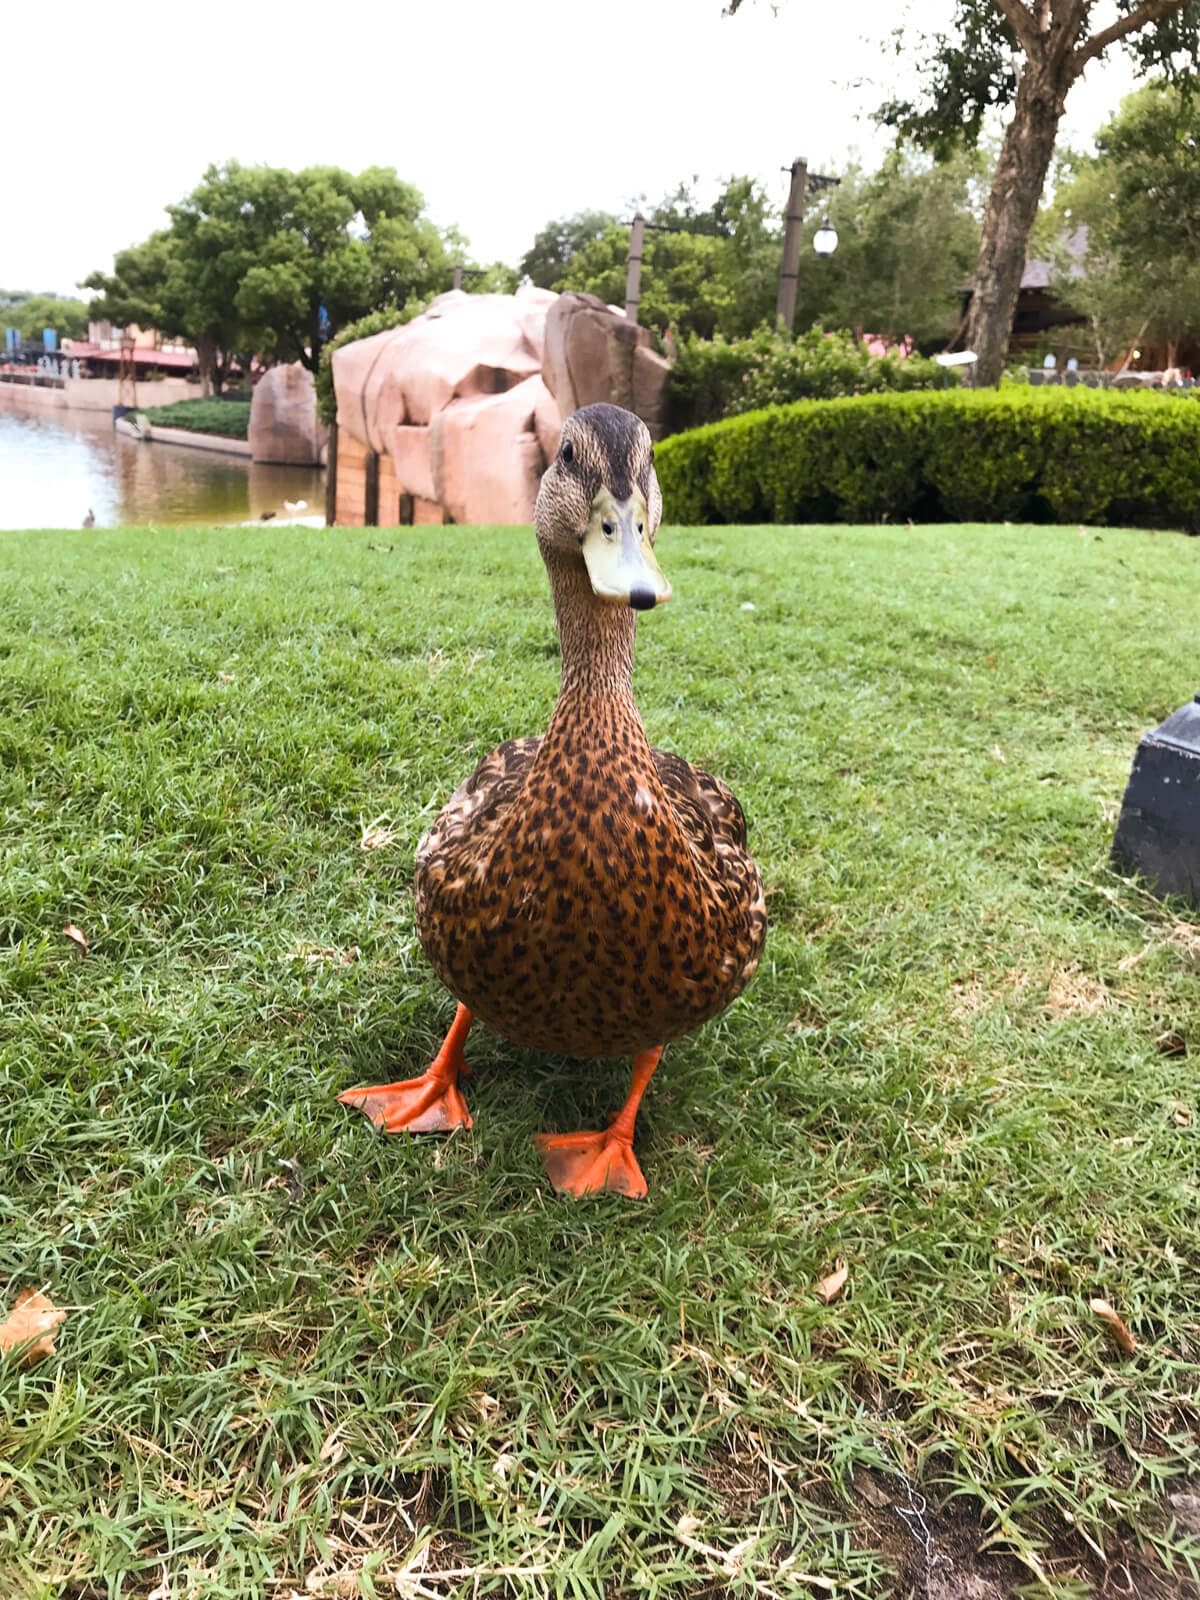 A close shot of a brown duck standing on green grass. Itâ€™s looking straight at the camera